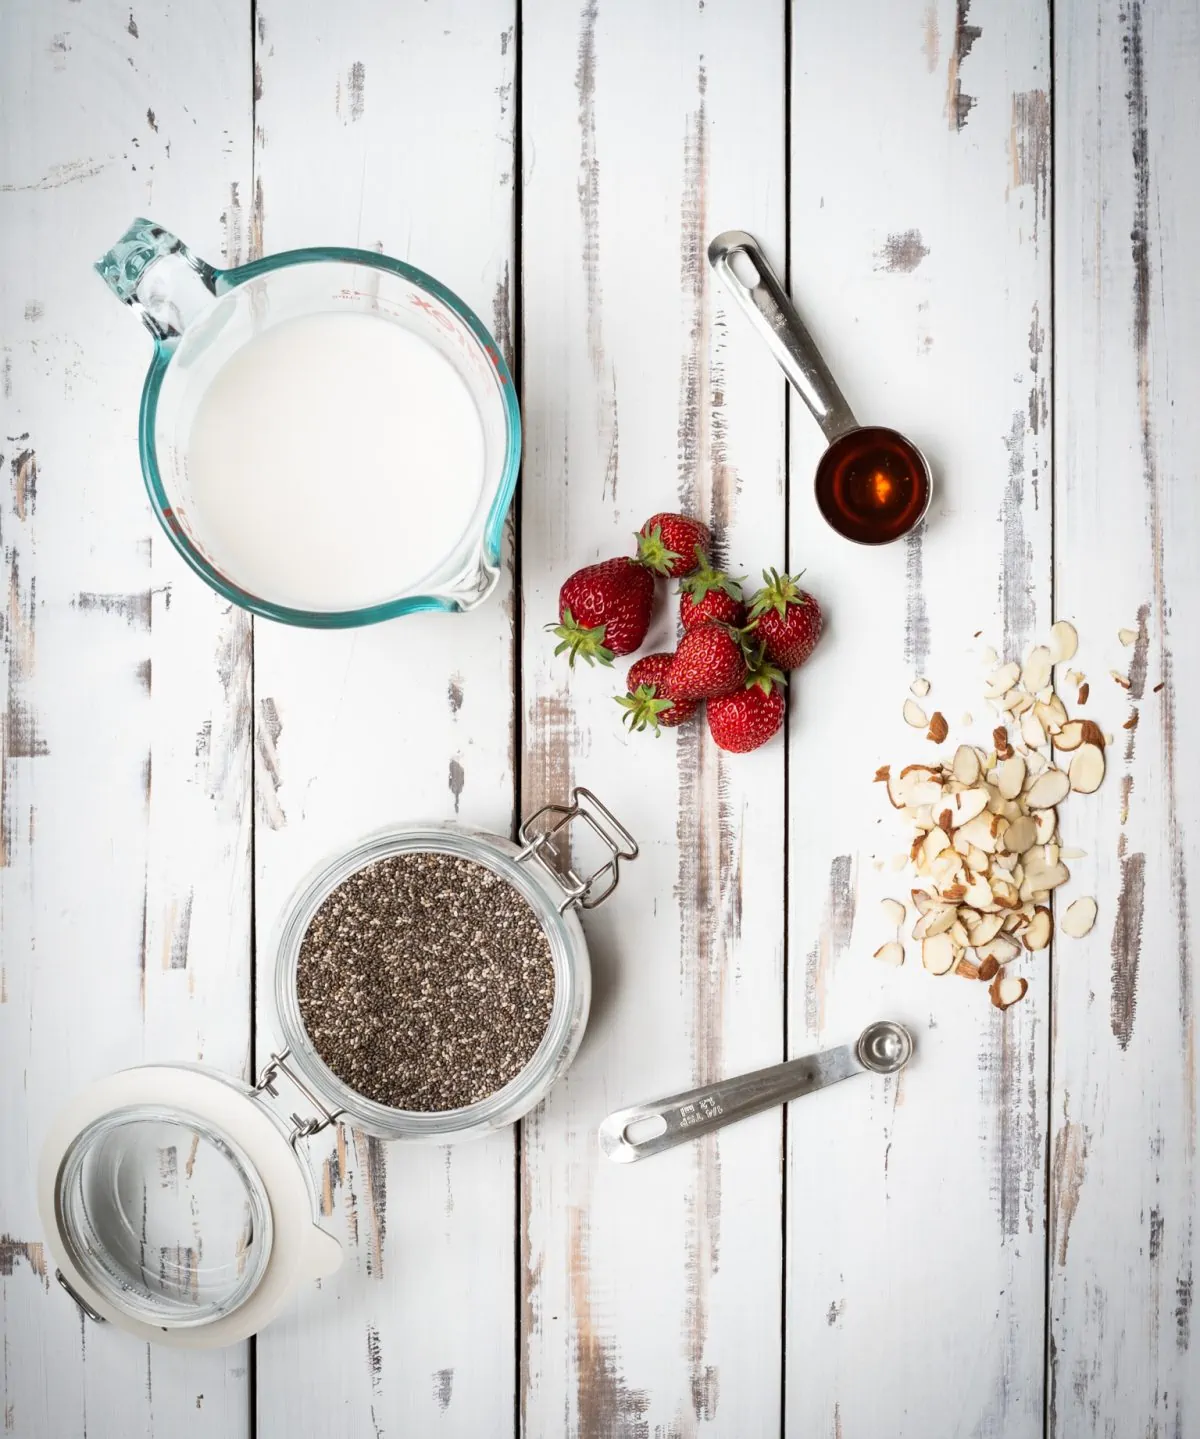 Almond chia seed pudding picture of ingredients